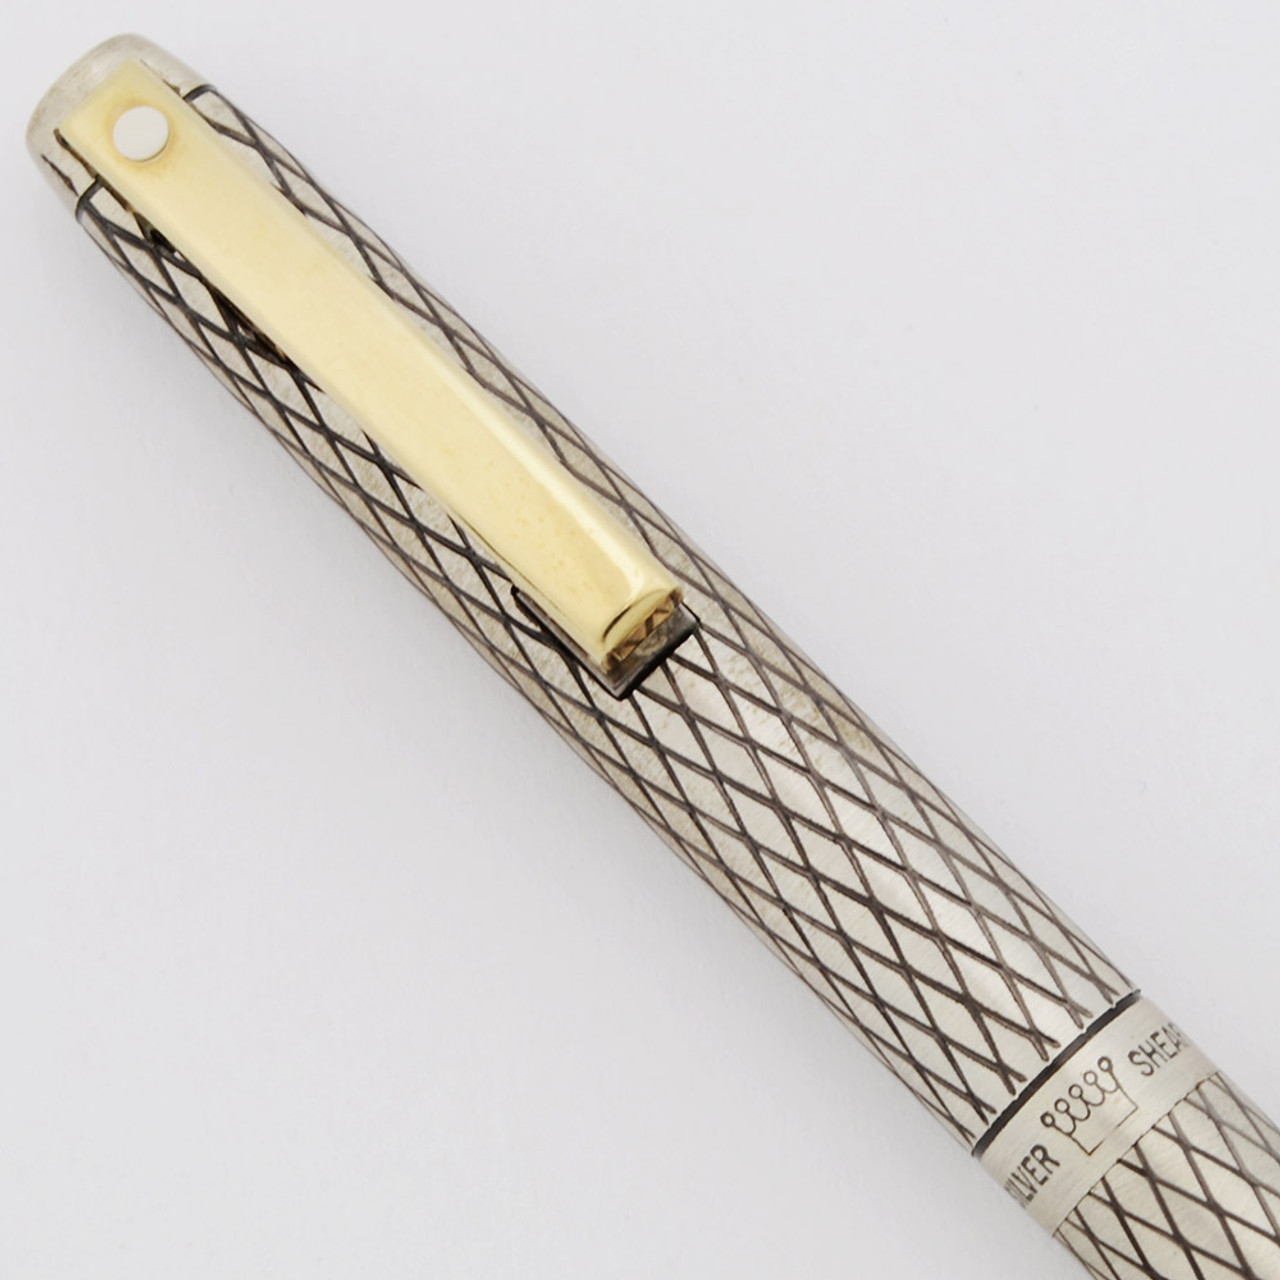 Sheaffer Silver Imperial Ballpoint (Later Version) - Sterling Diamond Design (Excellent, Works Well)